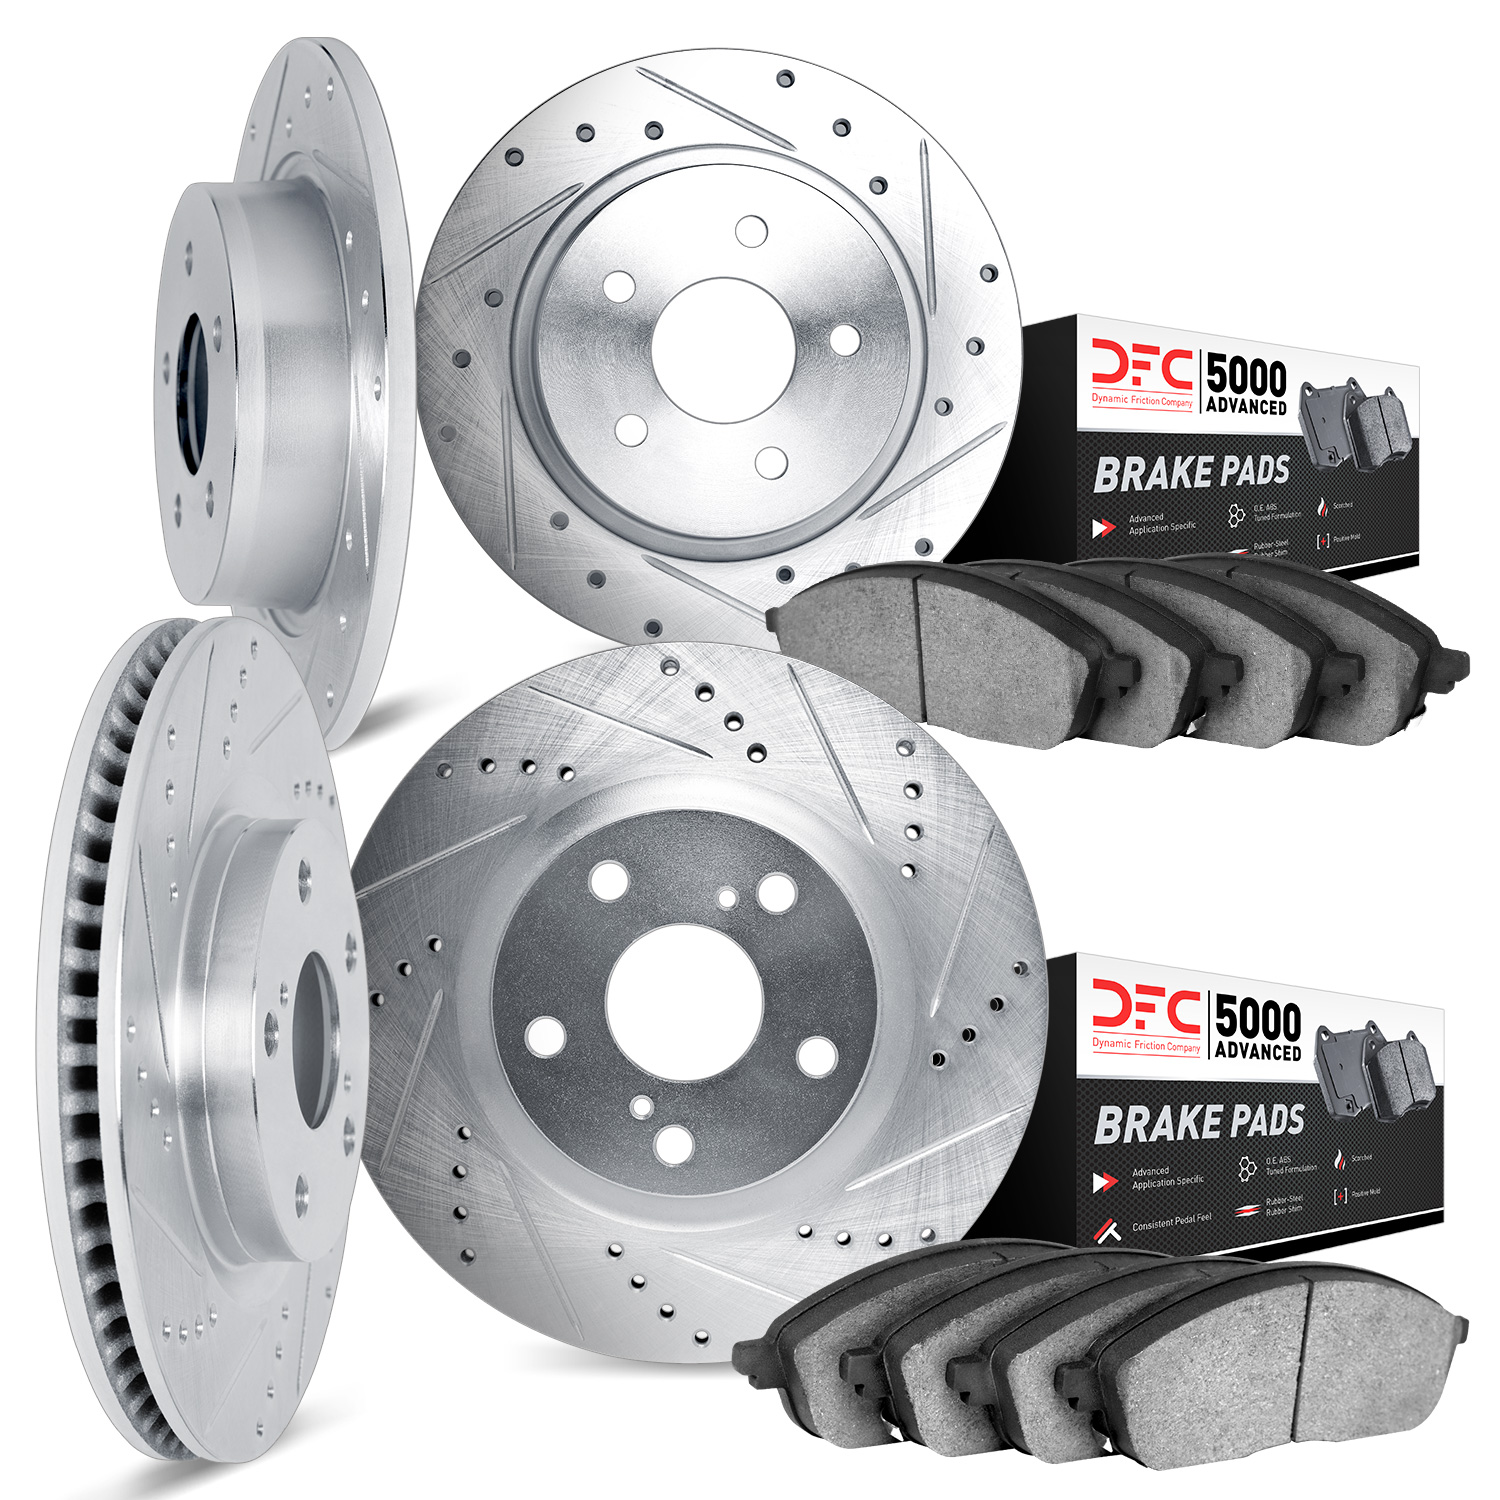 7504-54318 Drilled/Slotted Brake Rotors w/5000 Advanced Brake Pads Kit [Silver], 2001-2002 Ford/Lincoln/Mercury/Mazda, Position: